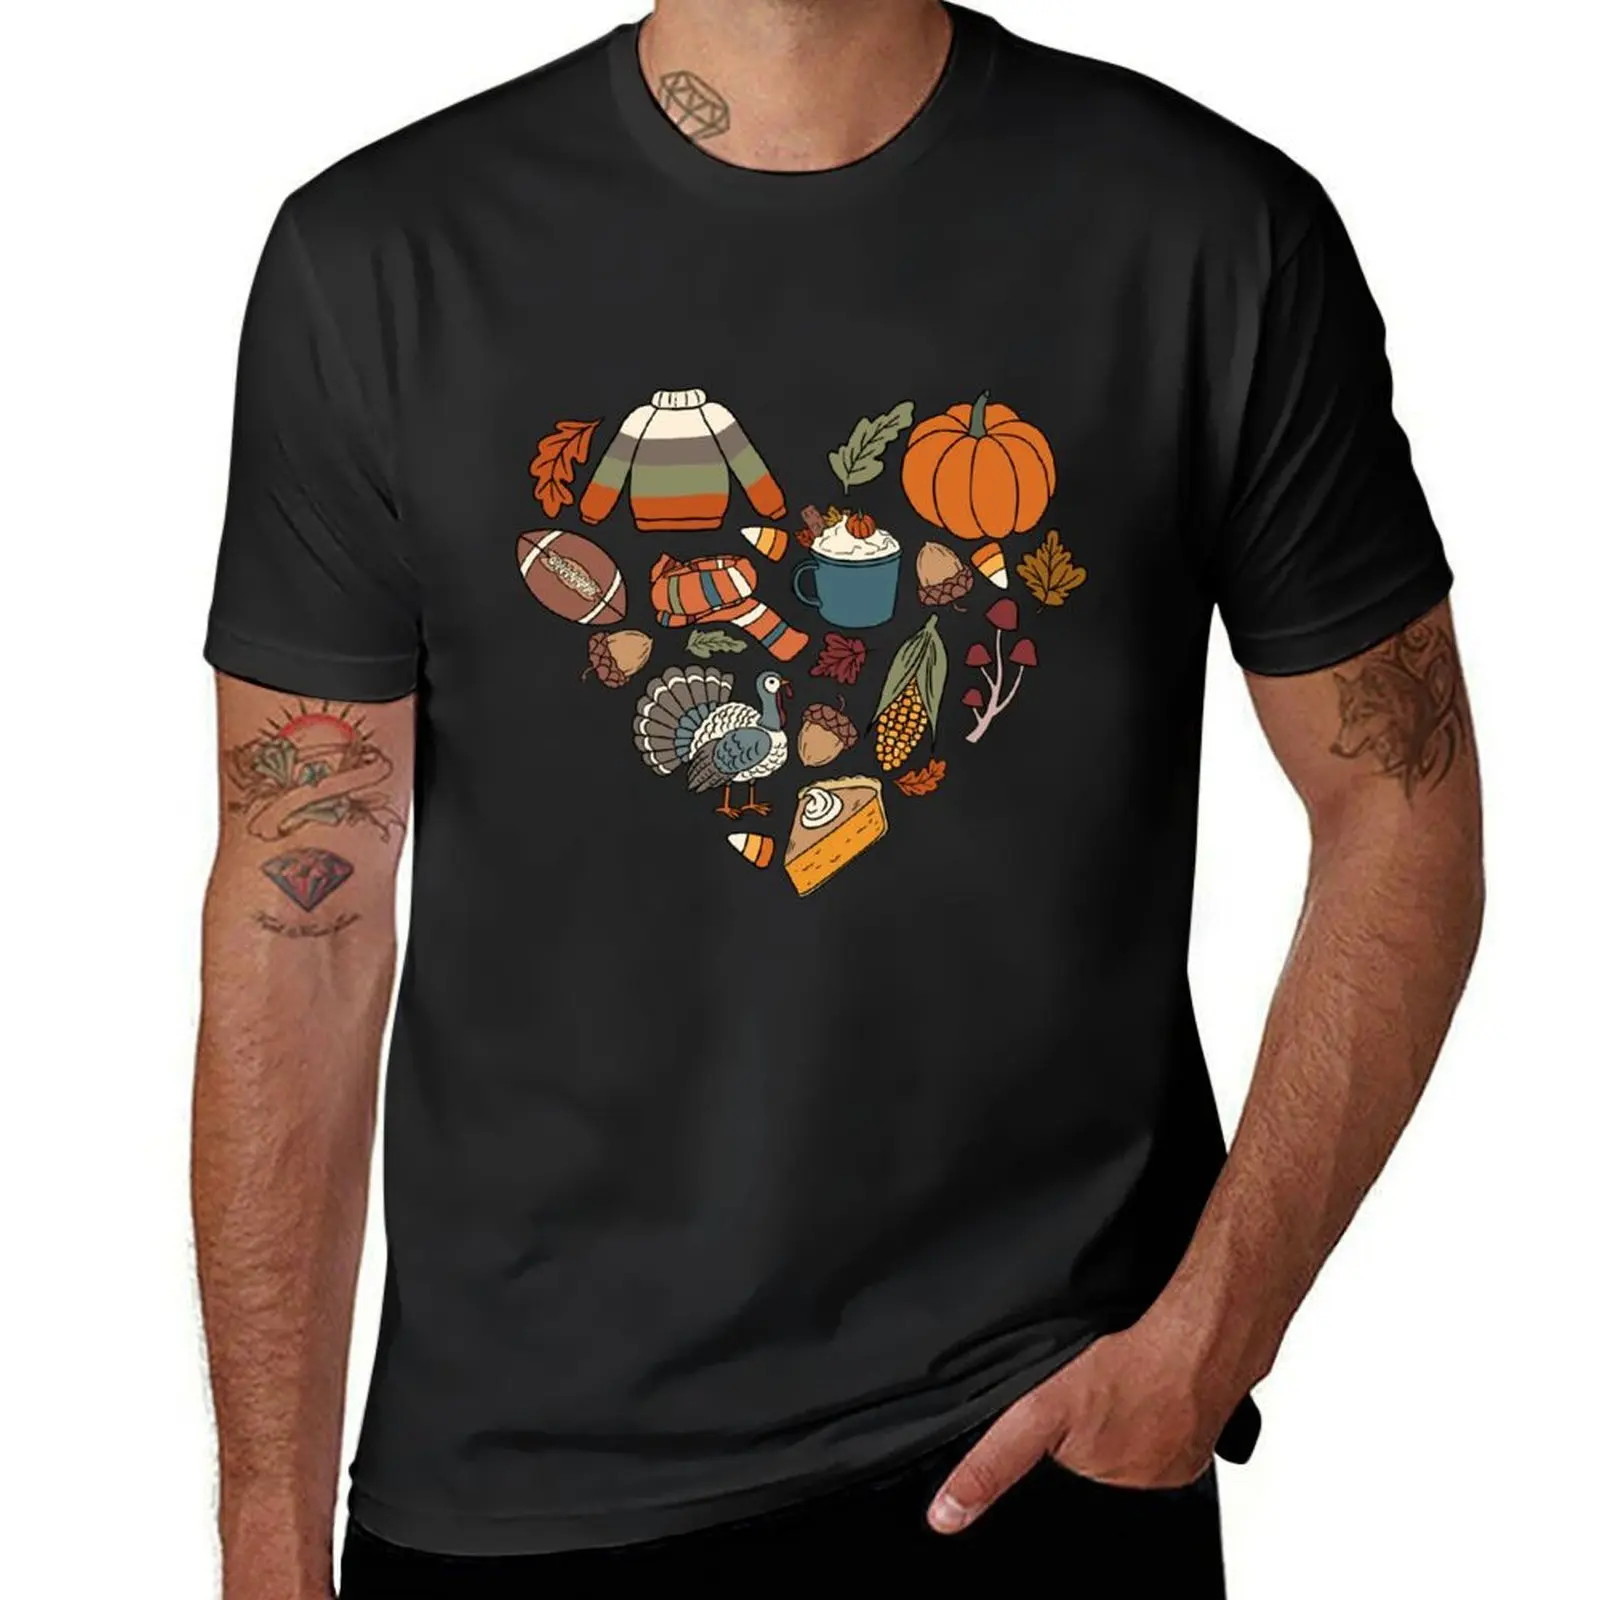 

Fall Favorites Doodle Heart T-shirt oversizeds summer tops heavyweights customizeds big and tall t shirts for men